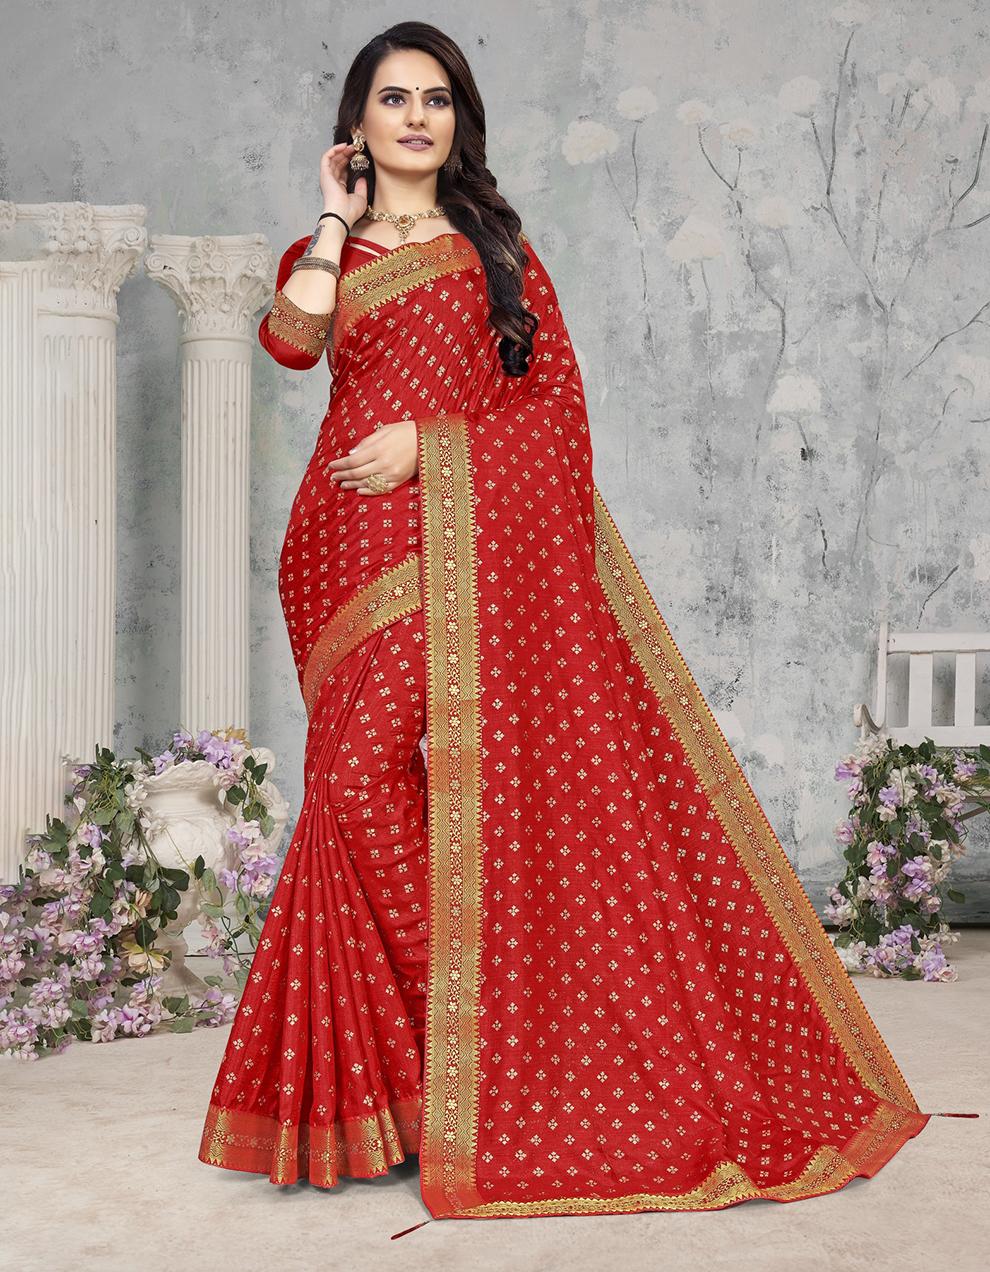 Red Vichitra Silk Saree With Blouse IW27030